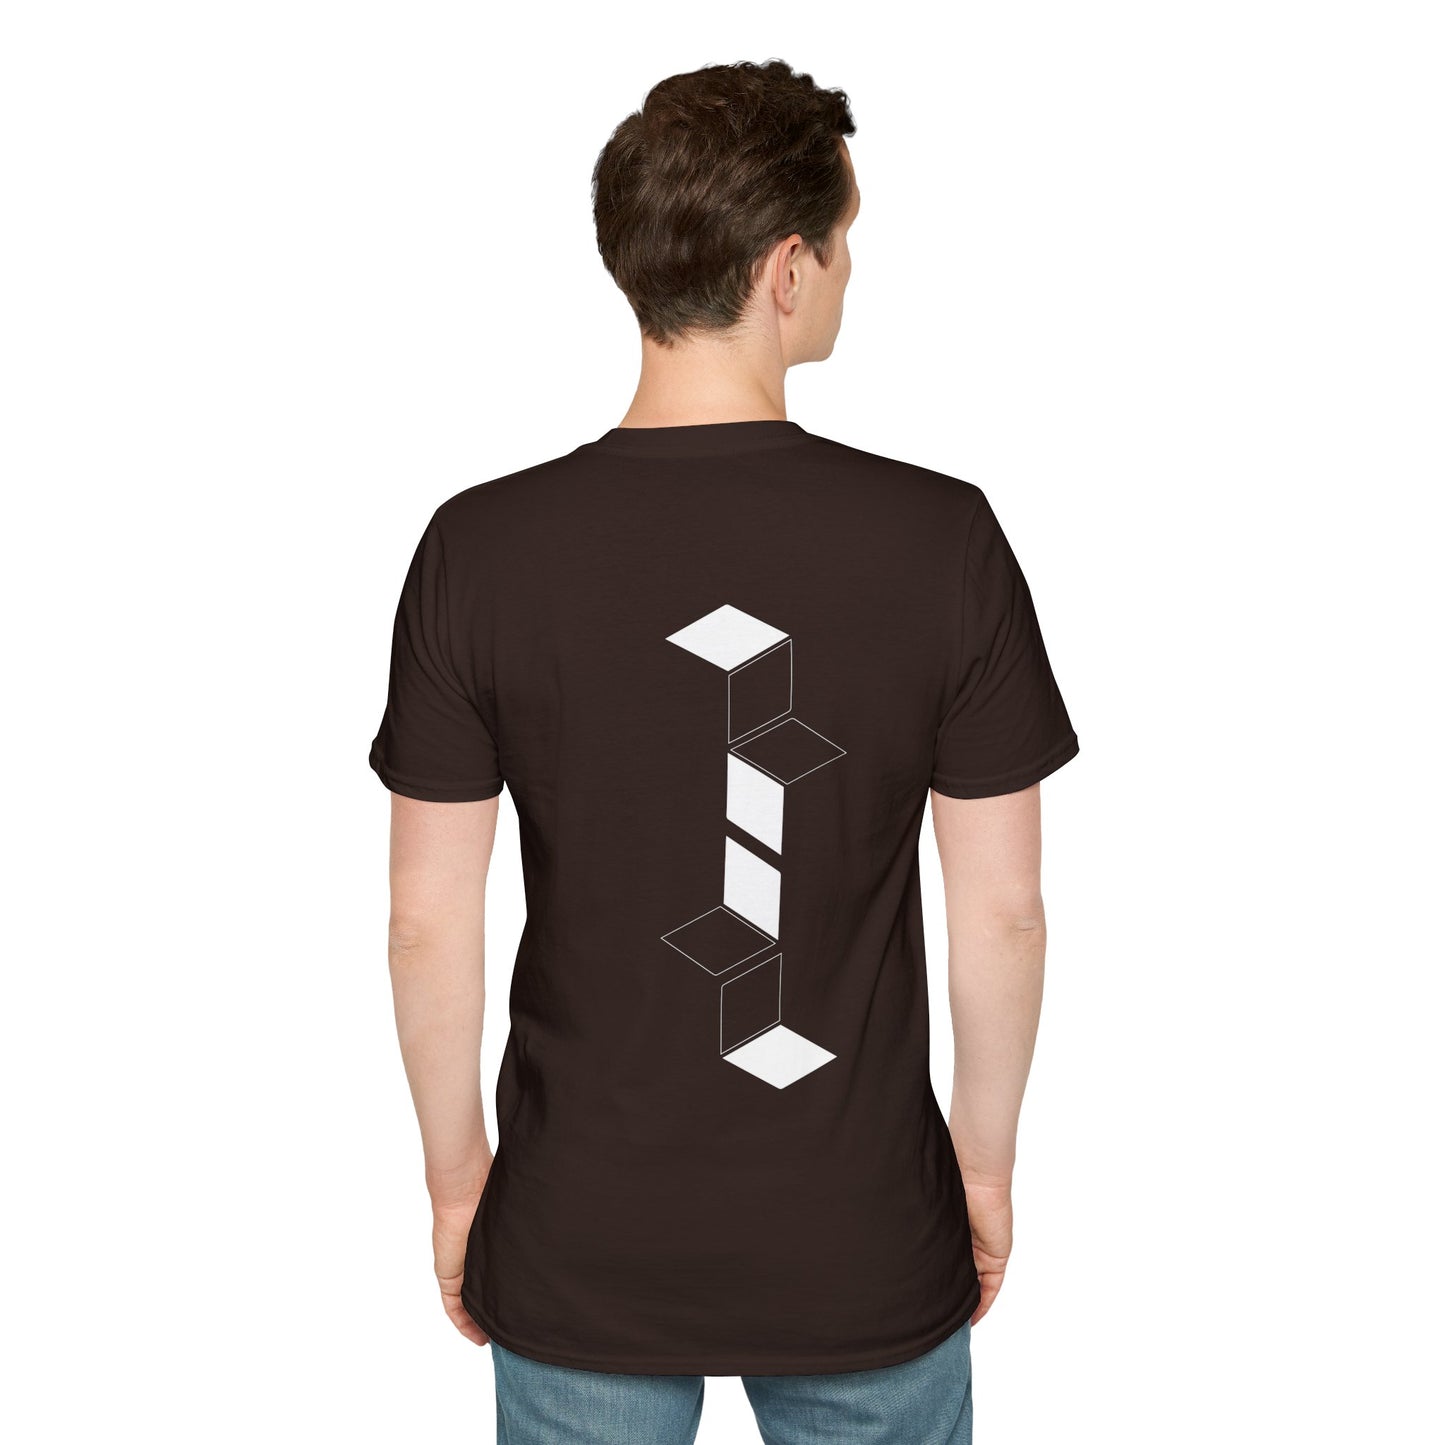 Brown T-shirt with white geometric cube pattern creating a 3D optical illusion